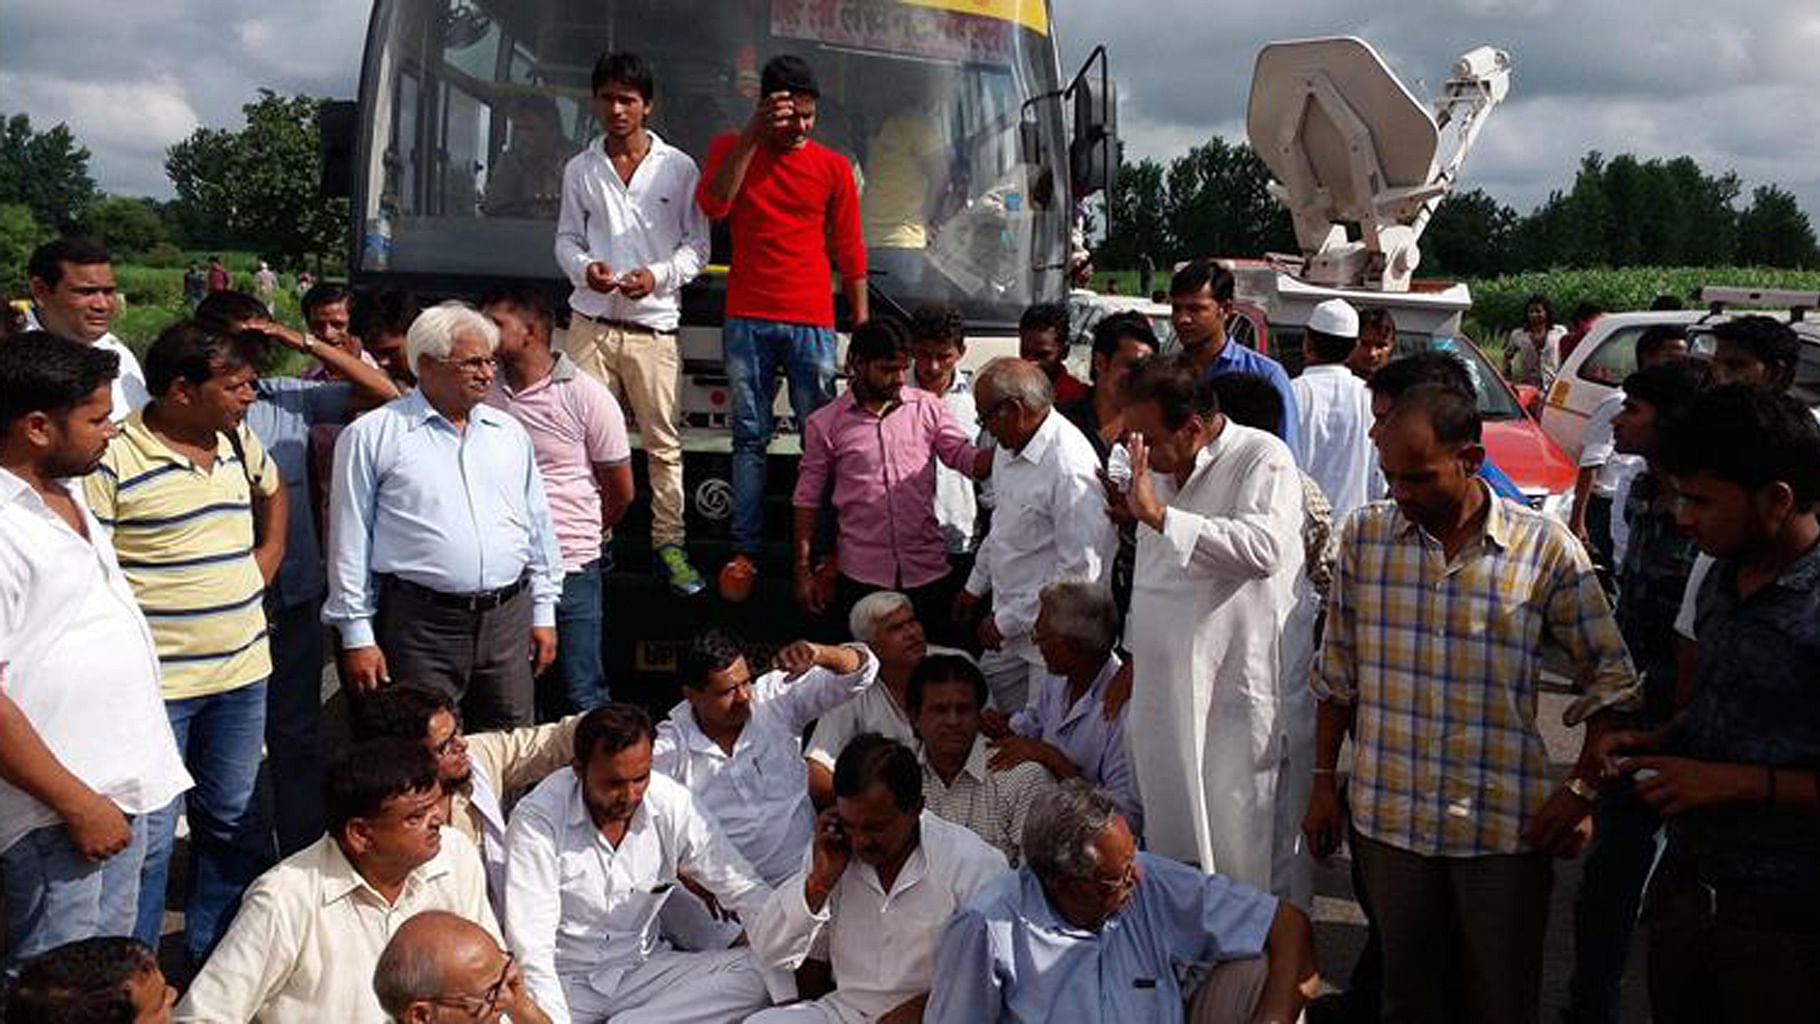 People block National Highway 91 in Bulandshahr to protest  the rape of a woman and her 13-year-old girl on 30 June. (Photo: PTI)